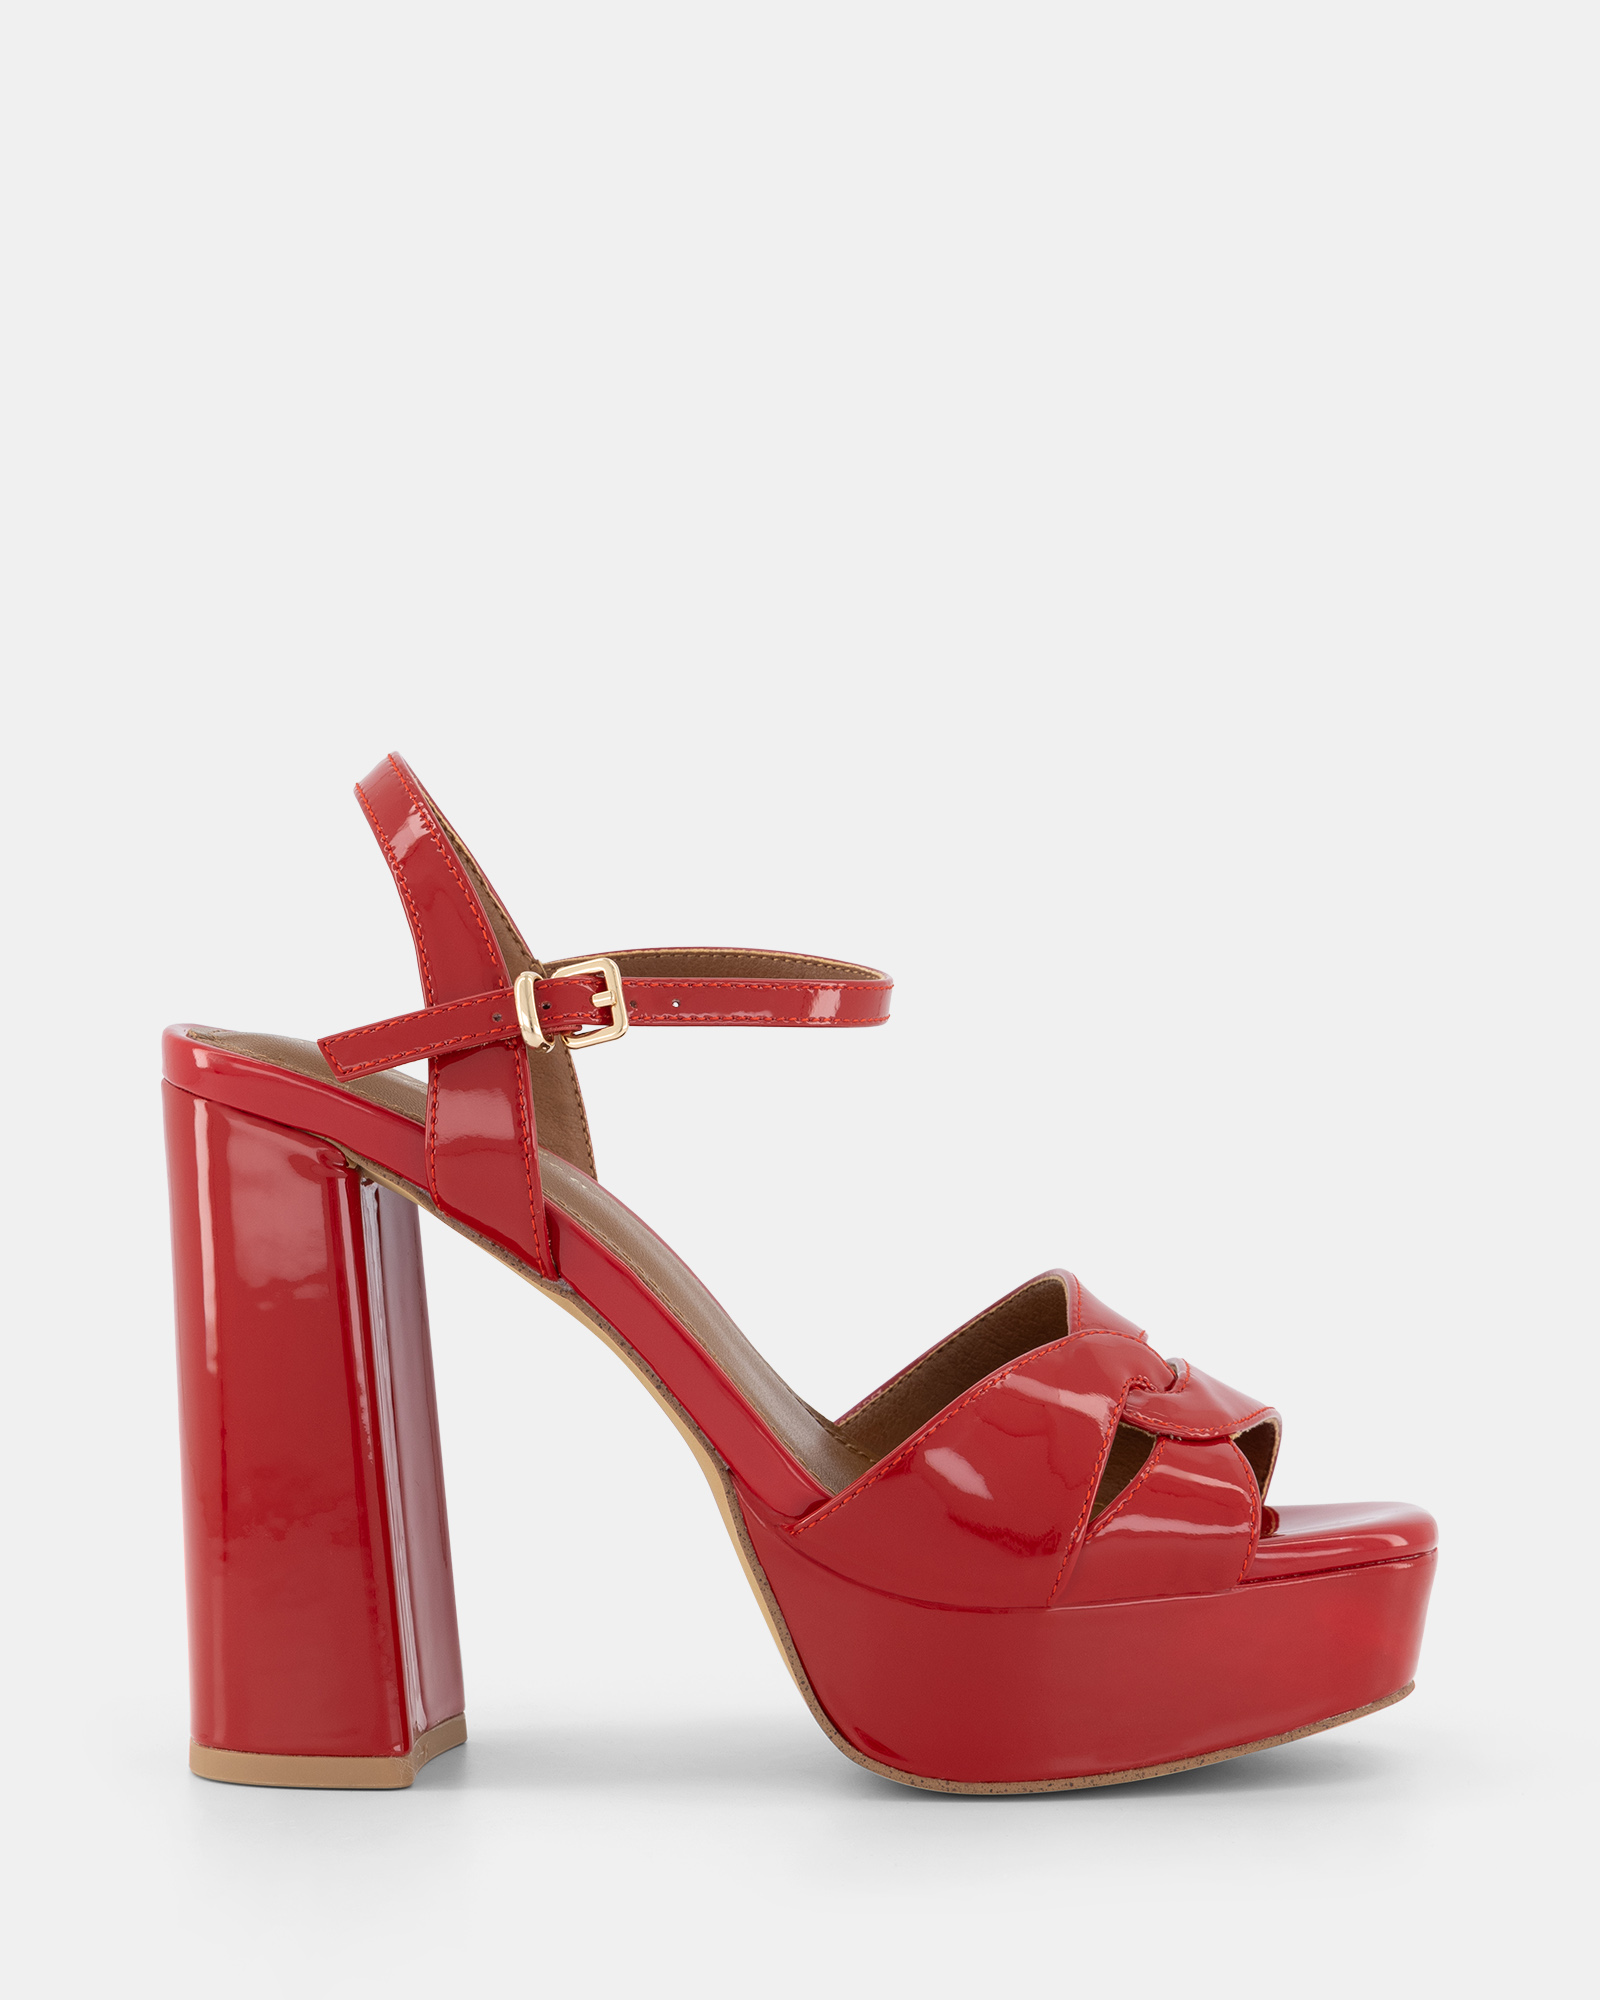 Buy MACK Red Patent heels Online at Shoe Connection